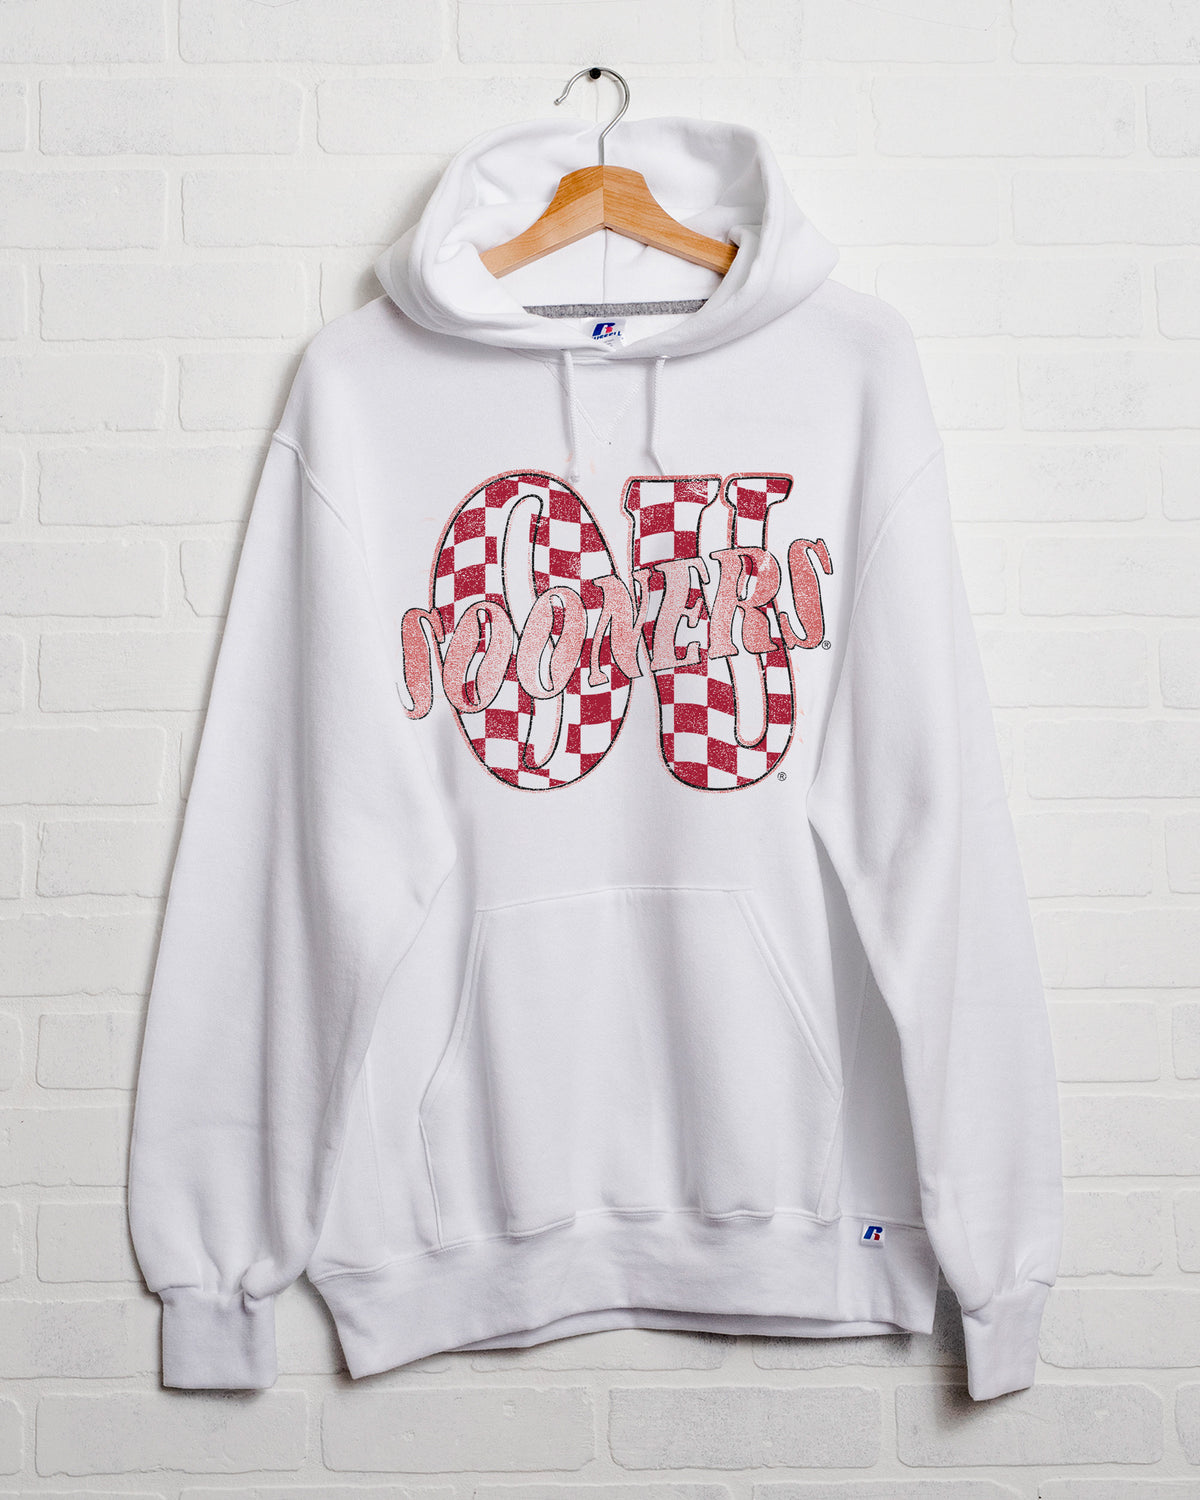 OU Sooners Twisted Check White Russell Hoodie - shoplivylu